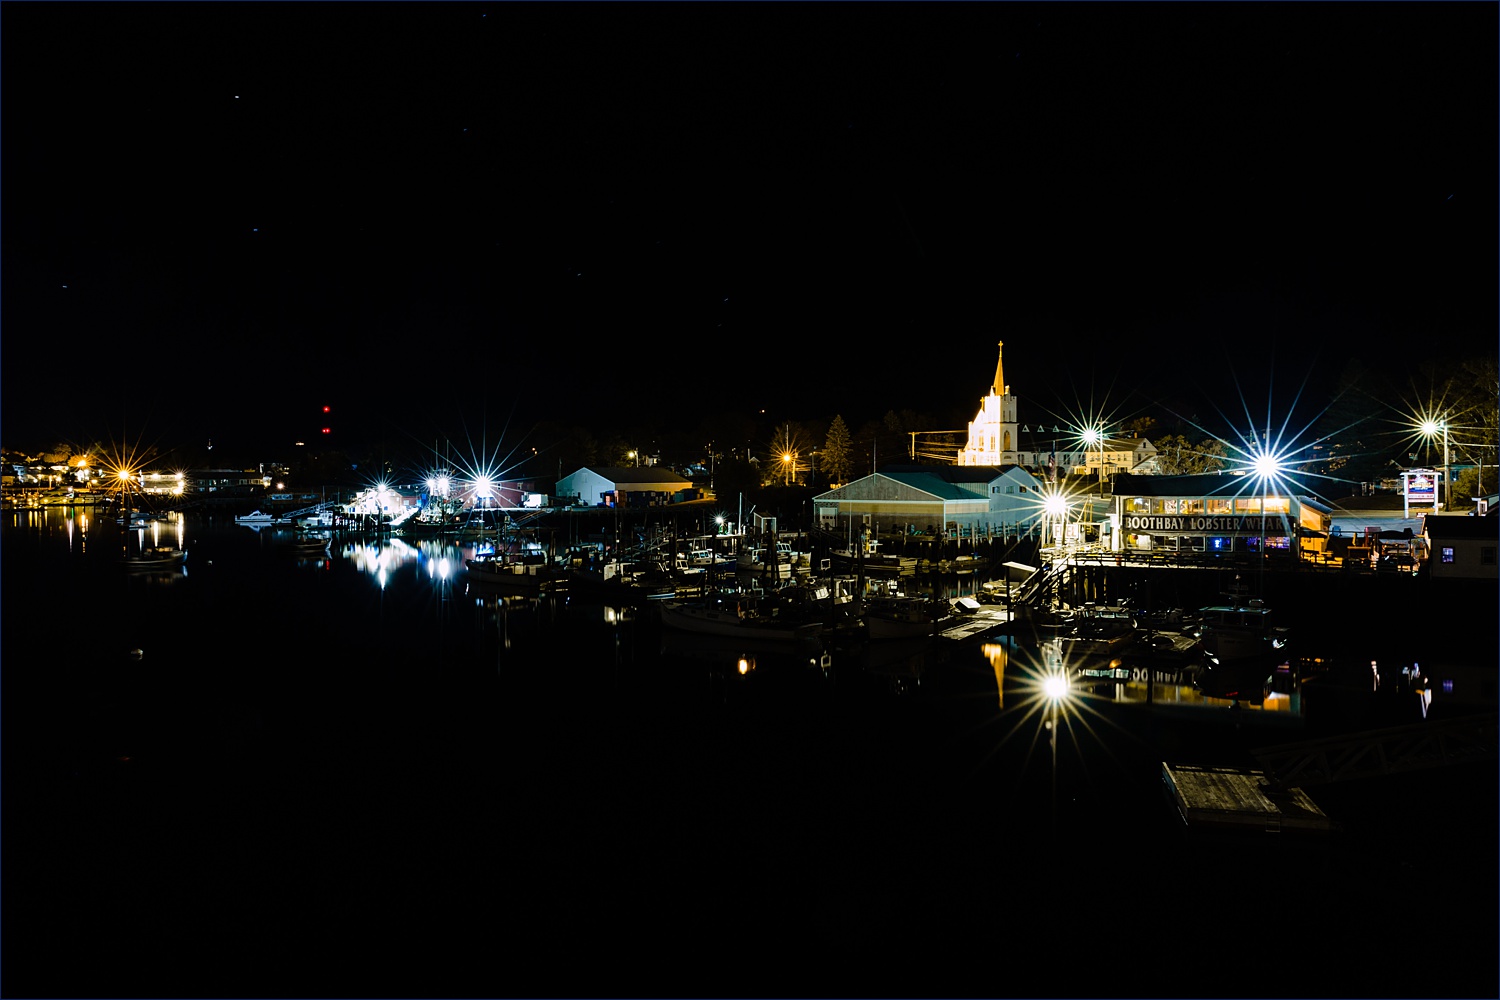 Boothbay Harbor Maine at night reflected in the waters